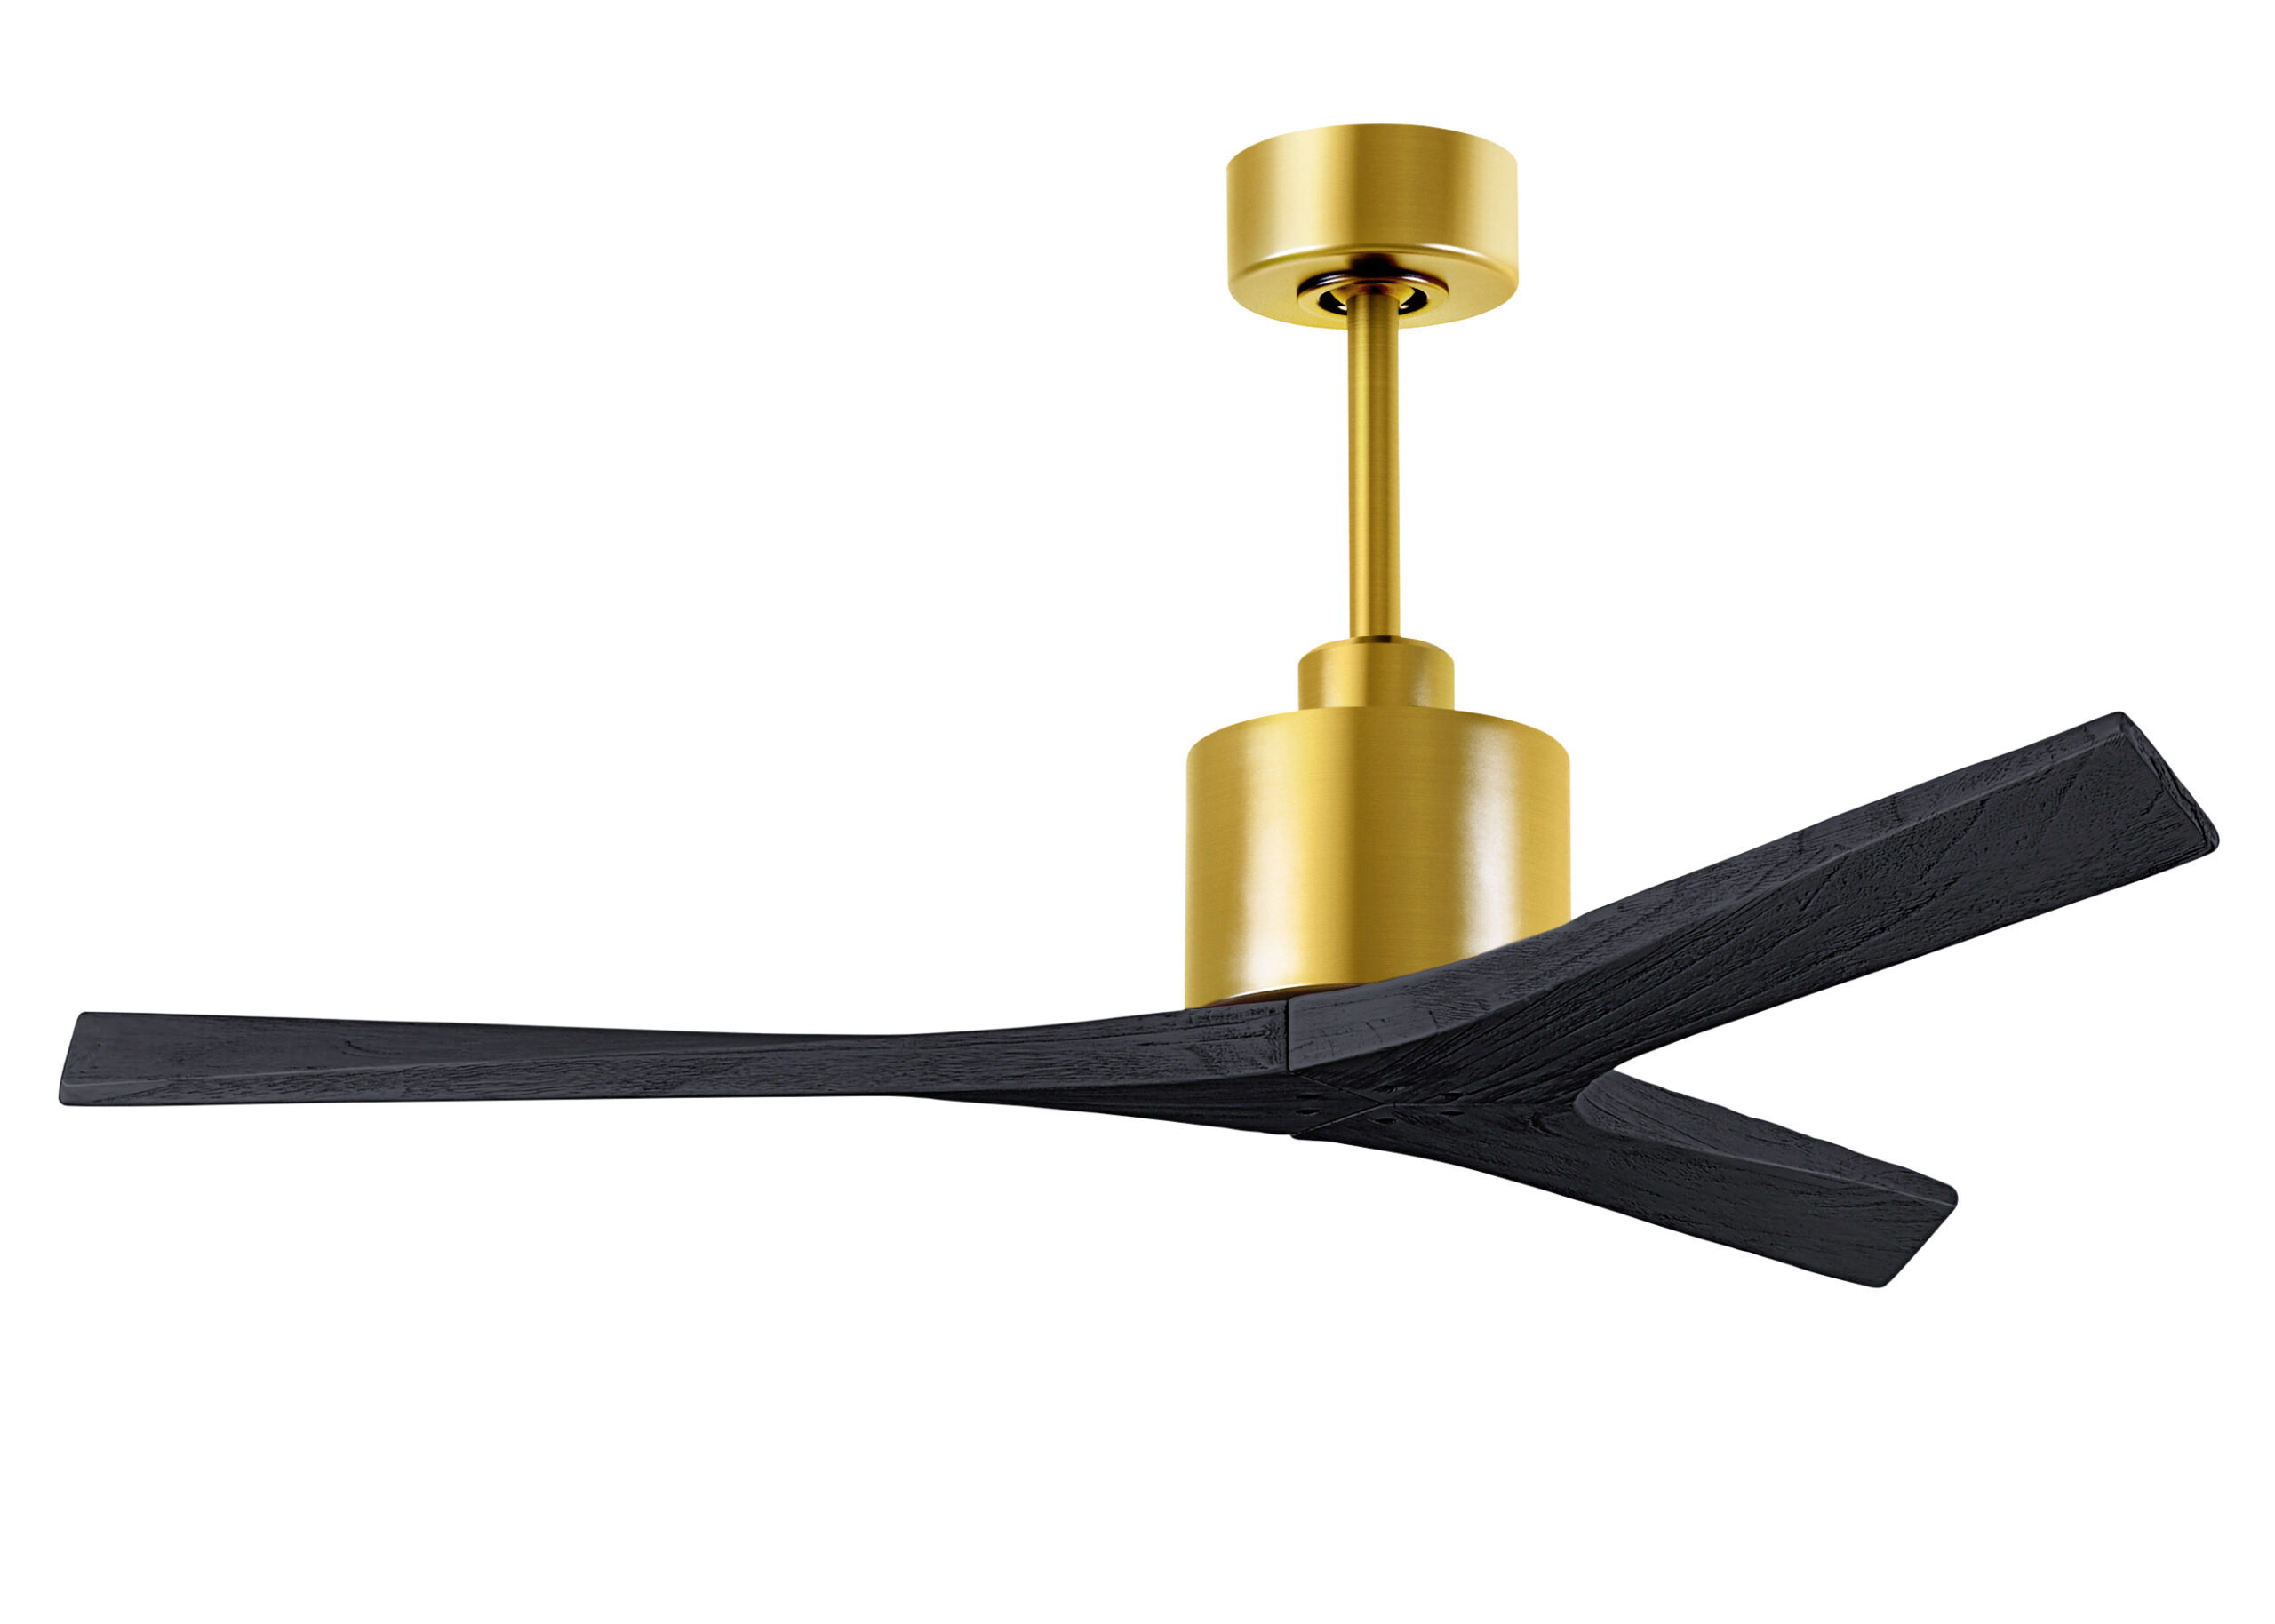 Mollywood Ceiling Fan in Brushed Brass with 52” Matte Black Blades